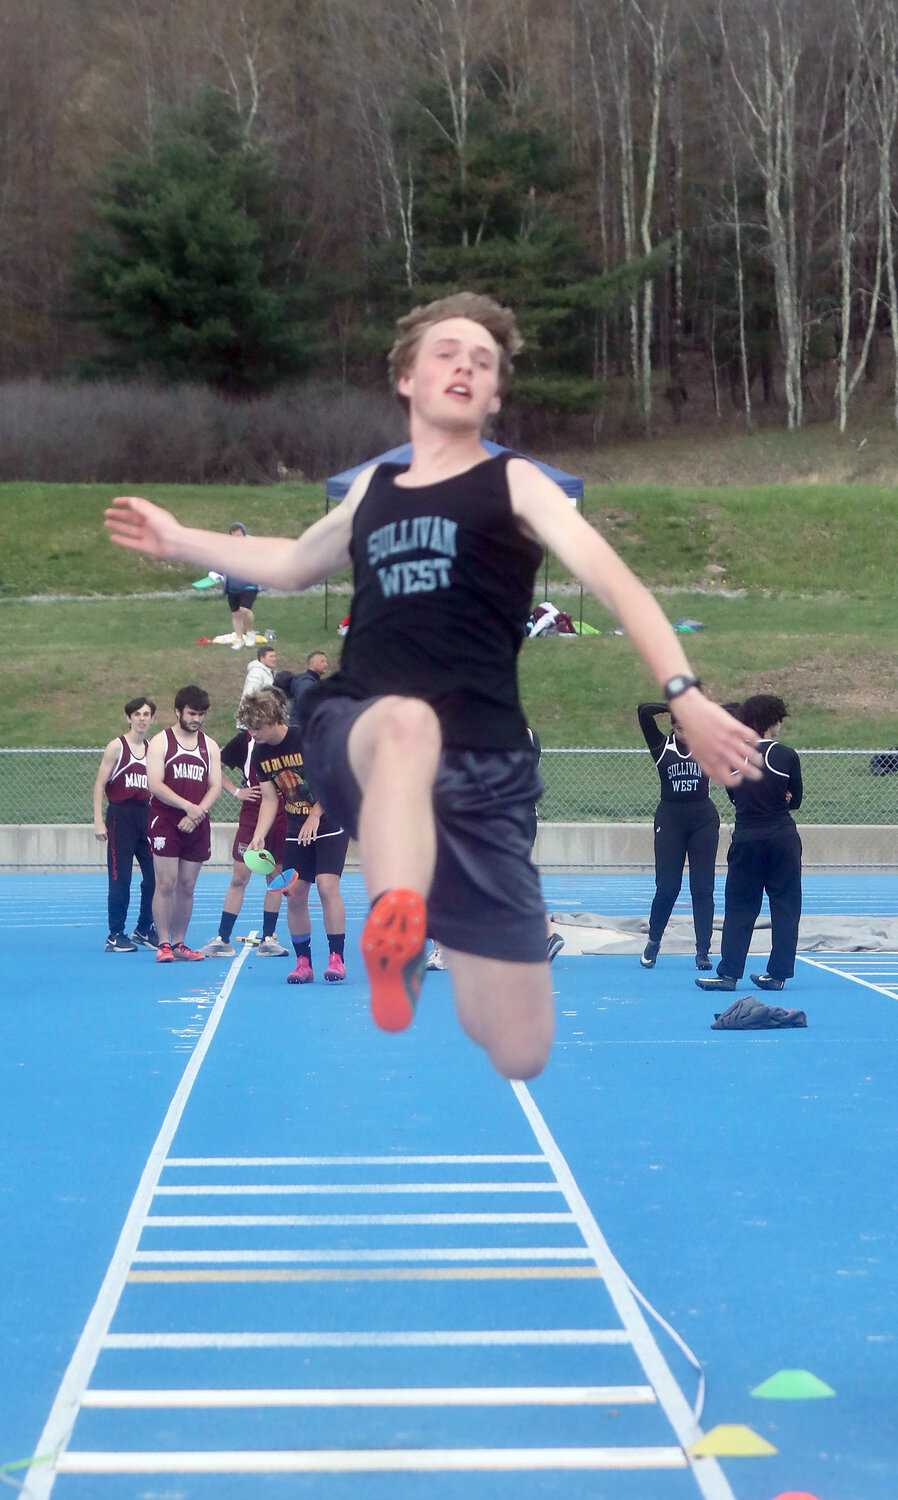 Sullivan West’s Hunter Ebeling wins the long jump with a leap of 17-11.